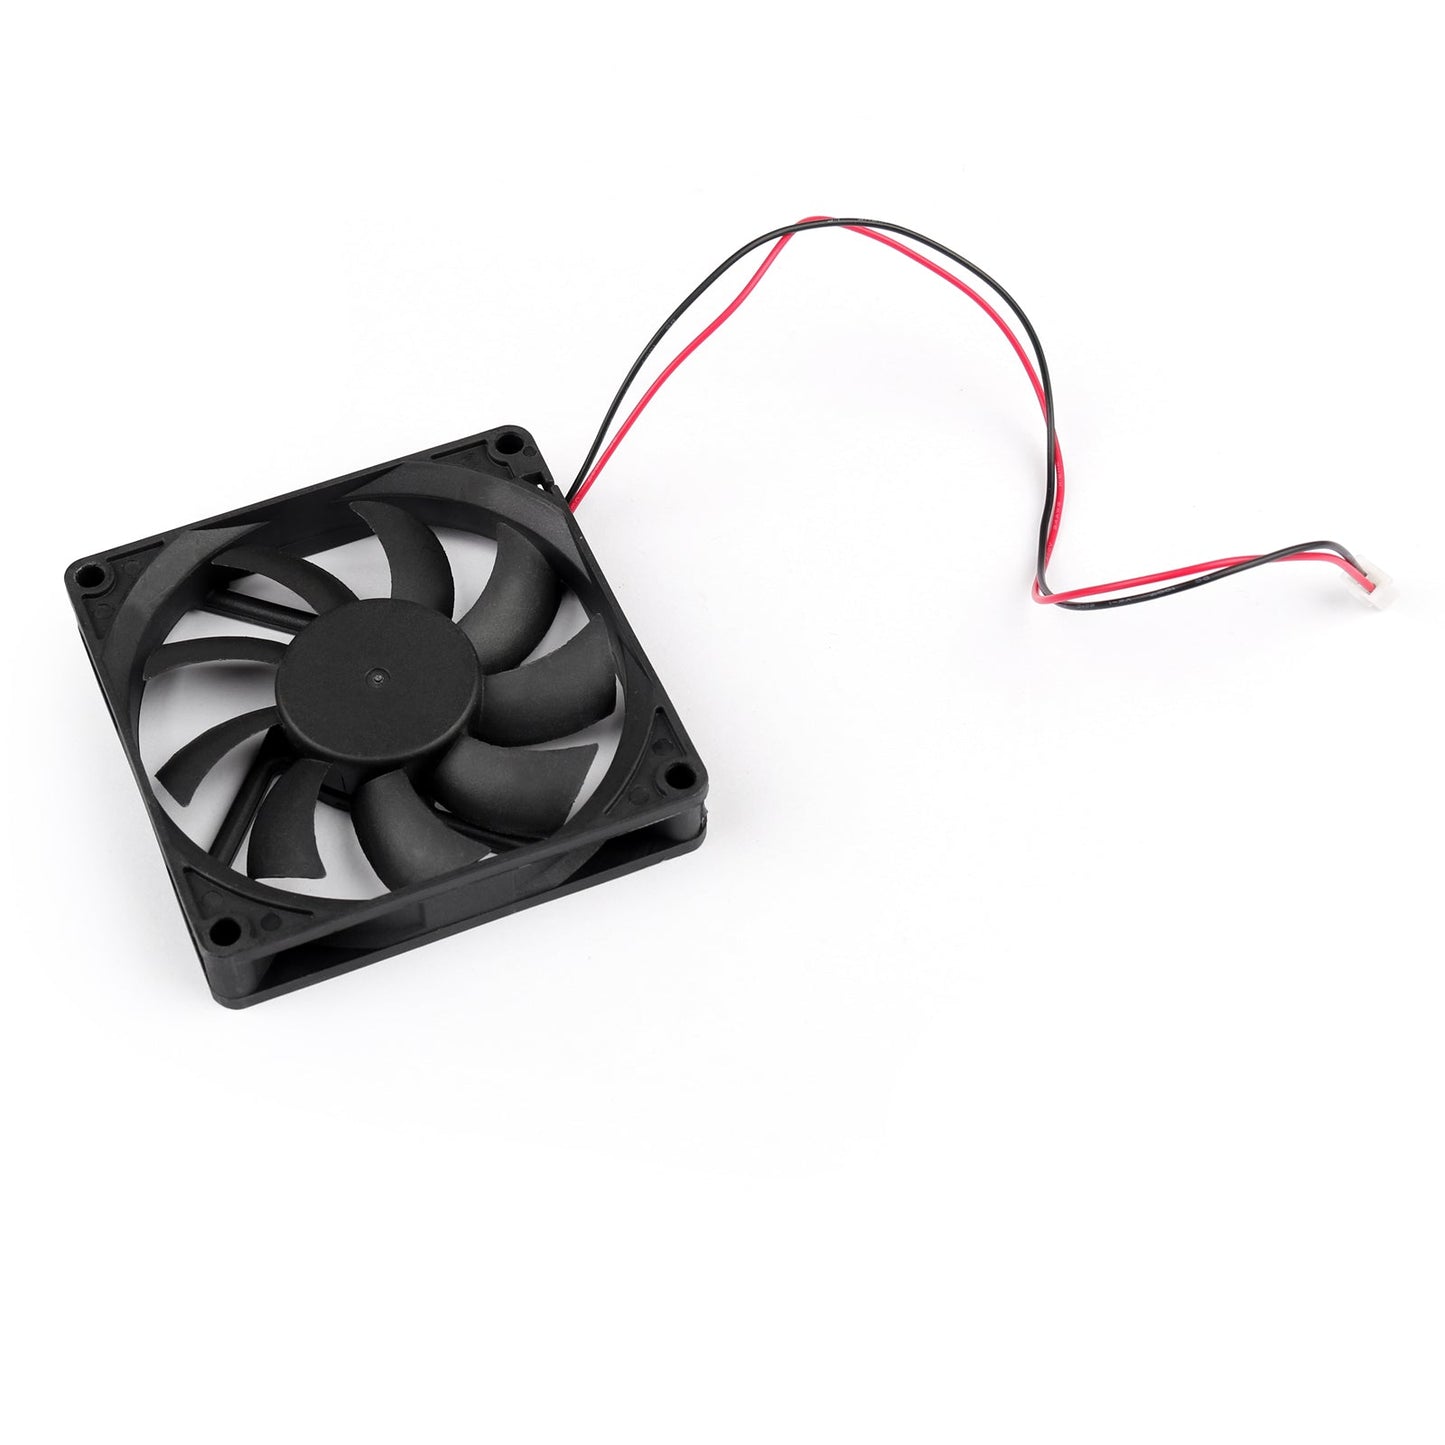 4Pcs DC Brushless Cooling PC Computer Fan 12V 8015s 80x80x15mm 0.16A 2 Pin Wire